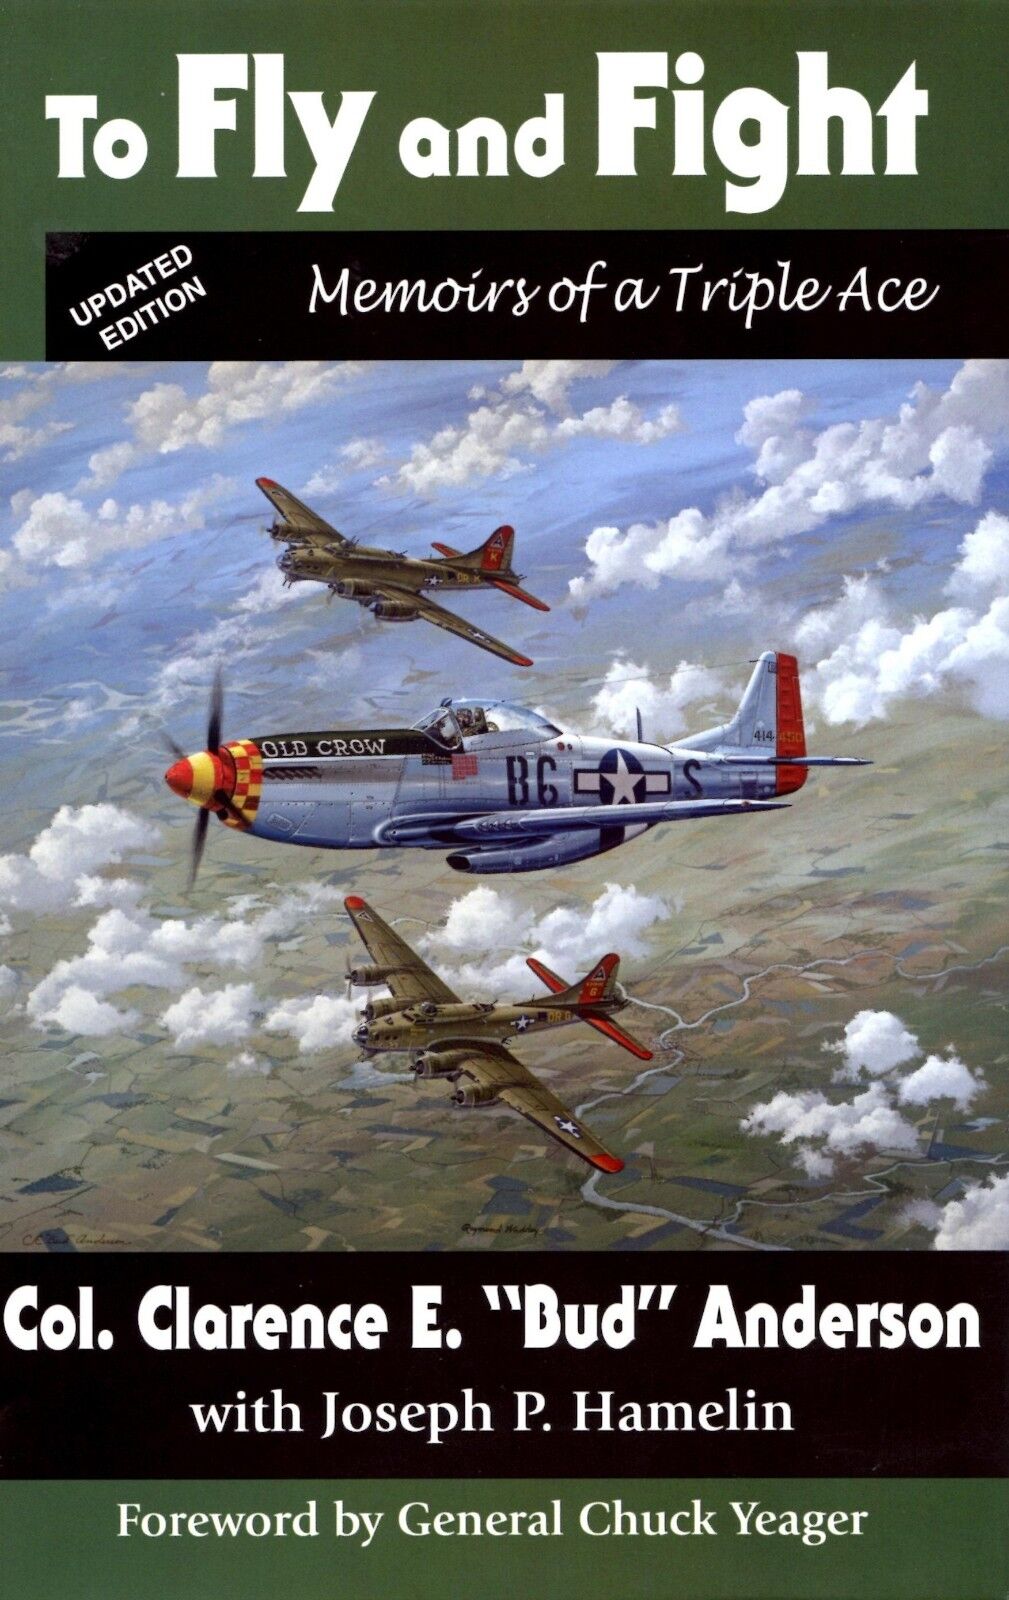 WW2 Triple Ace CE Bud Anderson Autographed Fly & Fight Book, Updated Edition